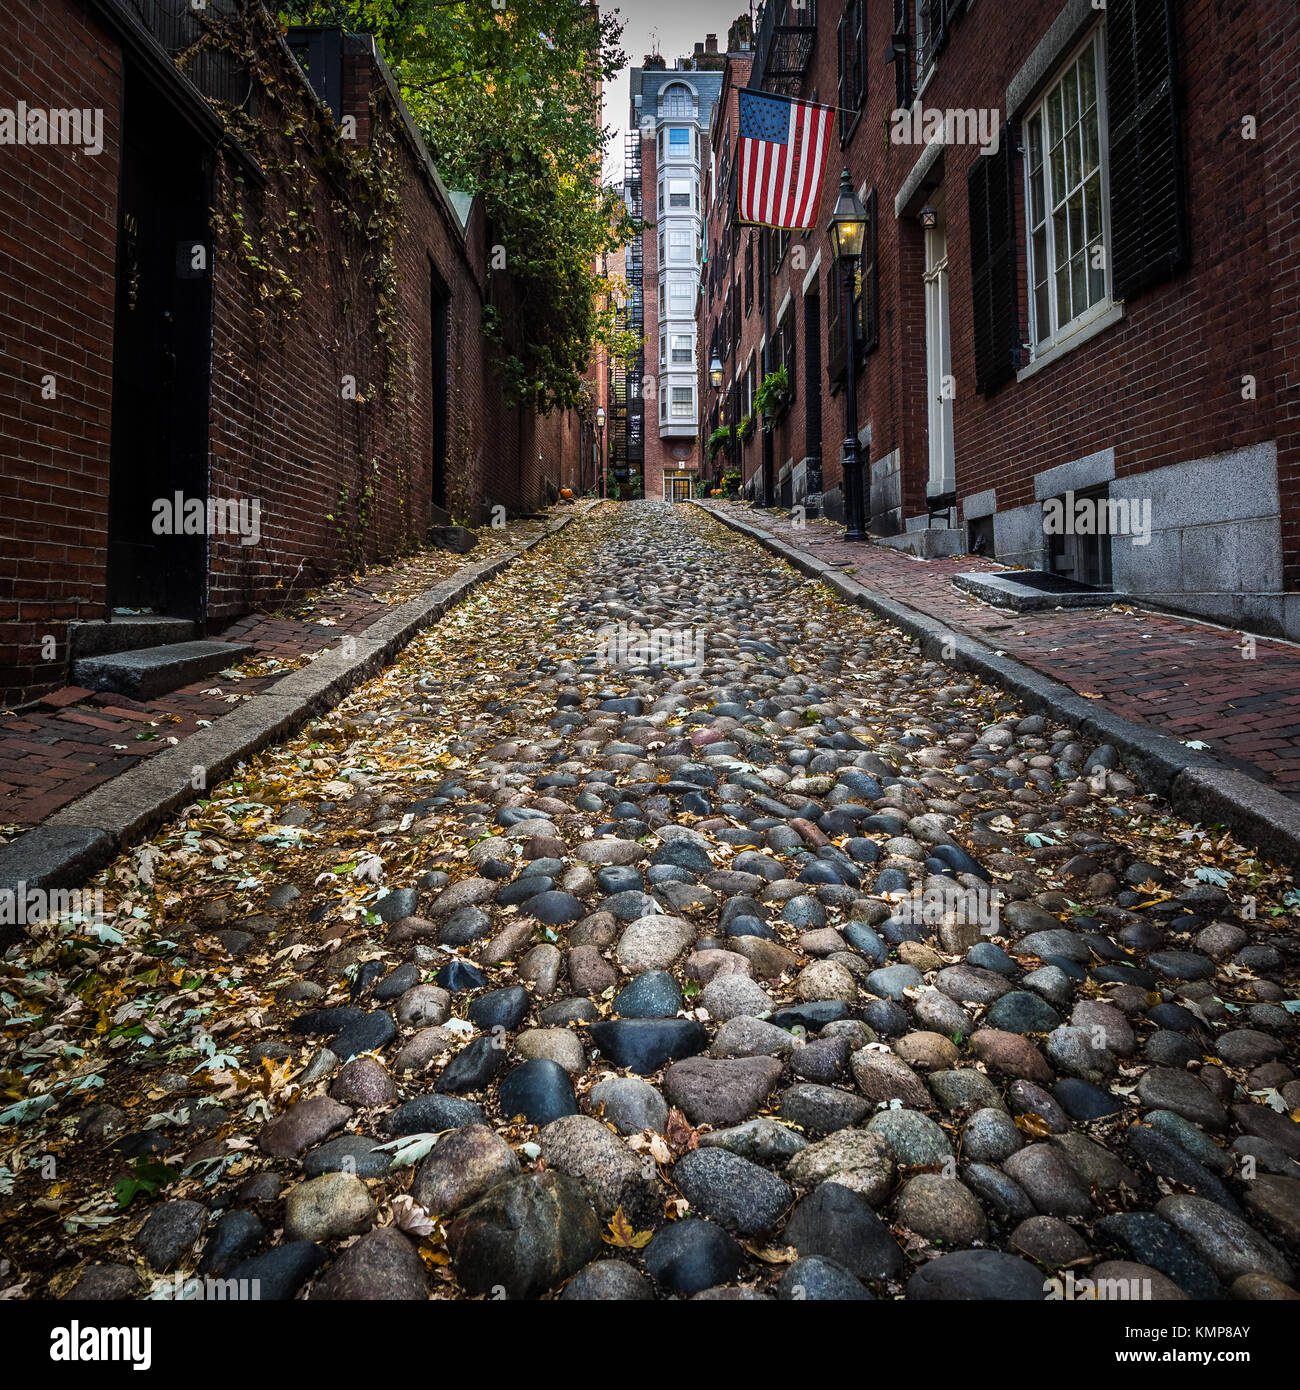 Acorn Street in the historic district of Beacon Hill in Boston, MA Stock Photo